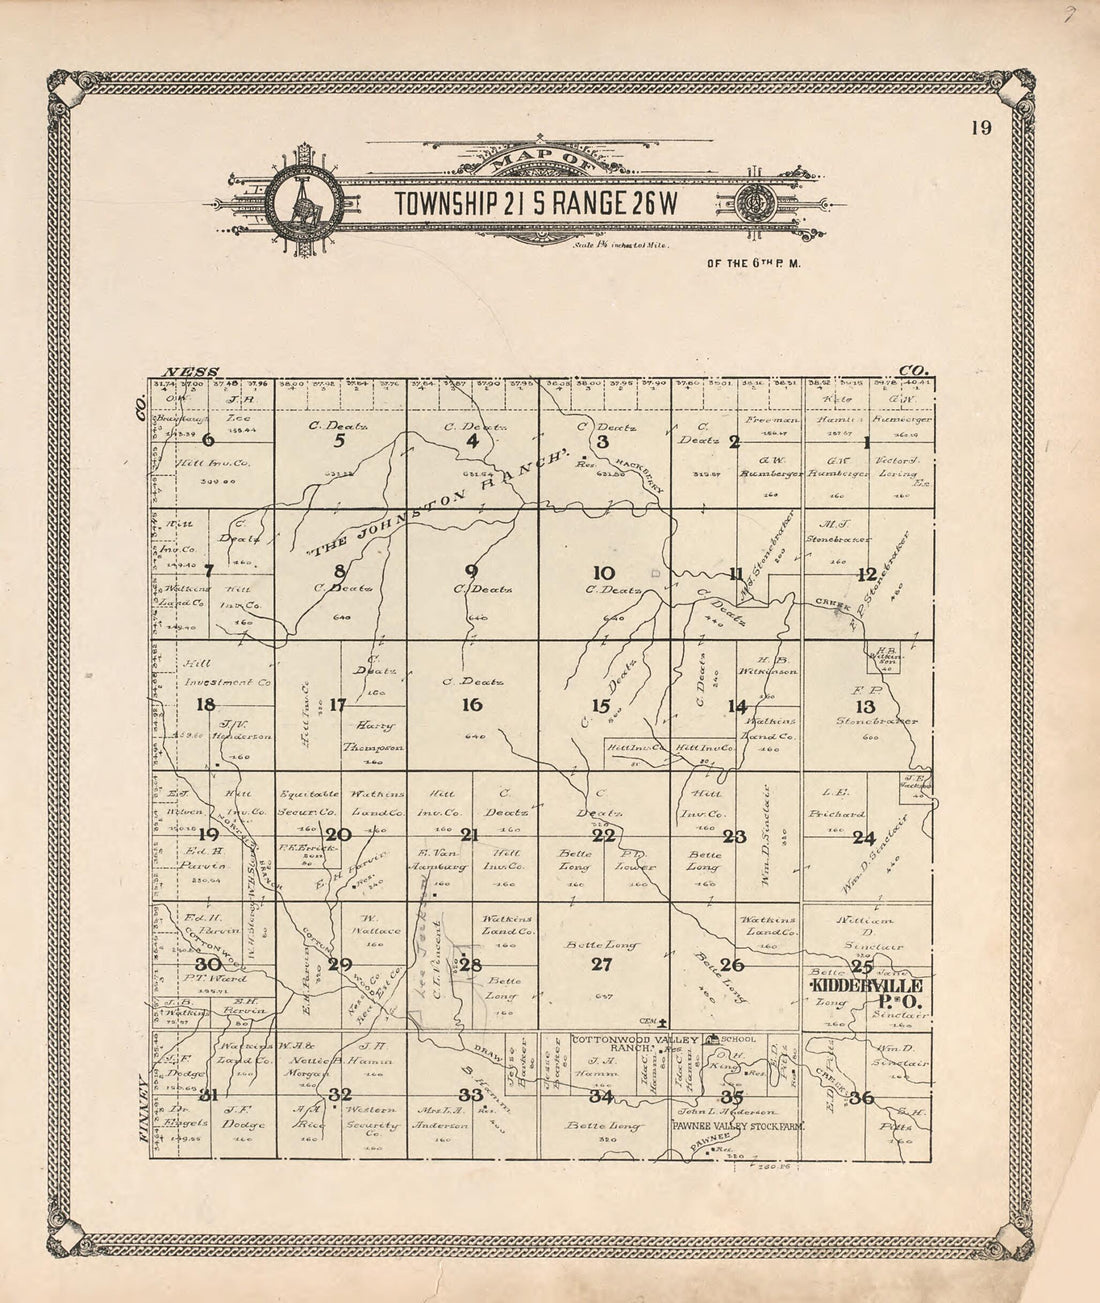 This old map of Map of Township 21 S Range 26 W from Standard Atlas of Hodgeman County, Kansas from 1907 was created by  Geo. A. Ogle &amp; Co in 1907